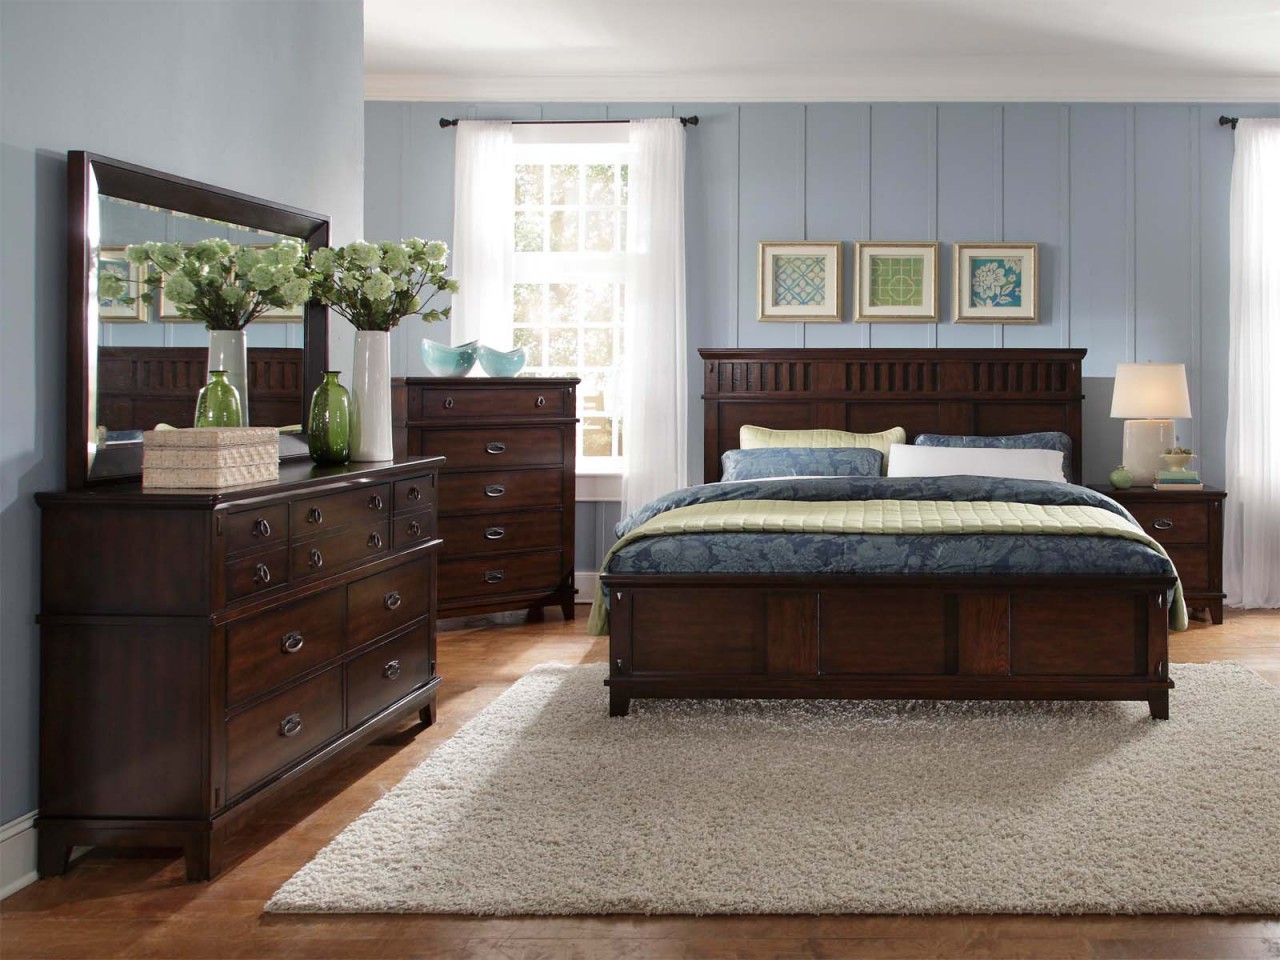 bedroom ideas with brown furniture photo - 6